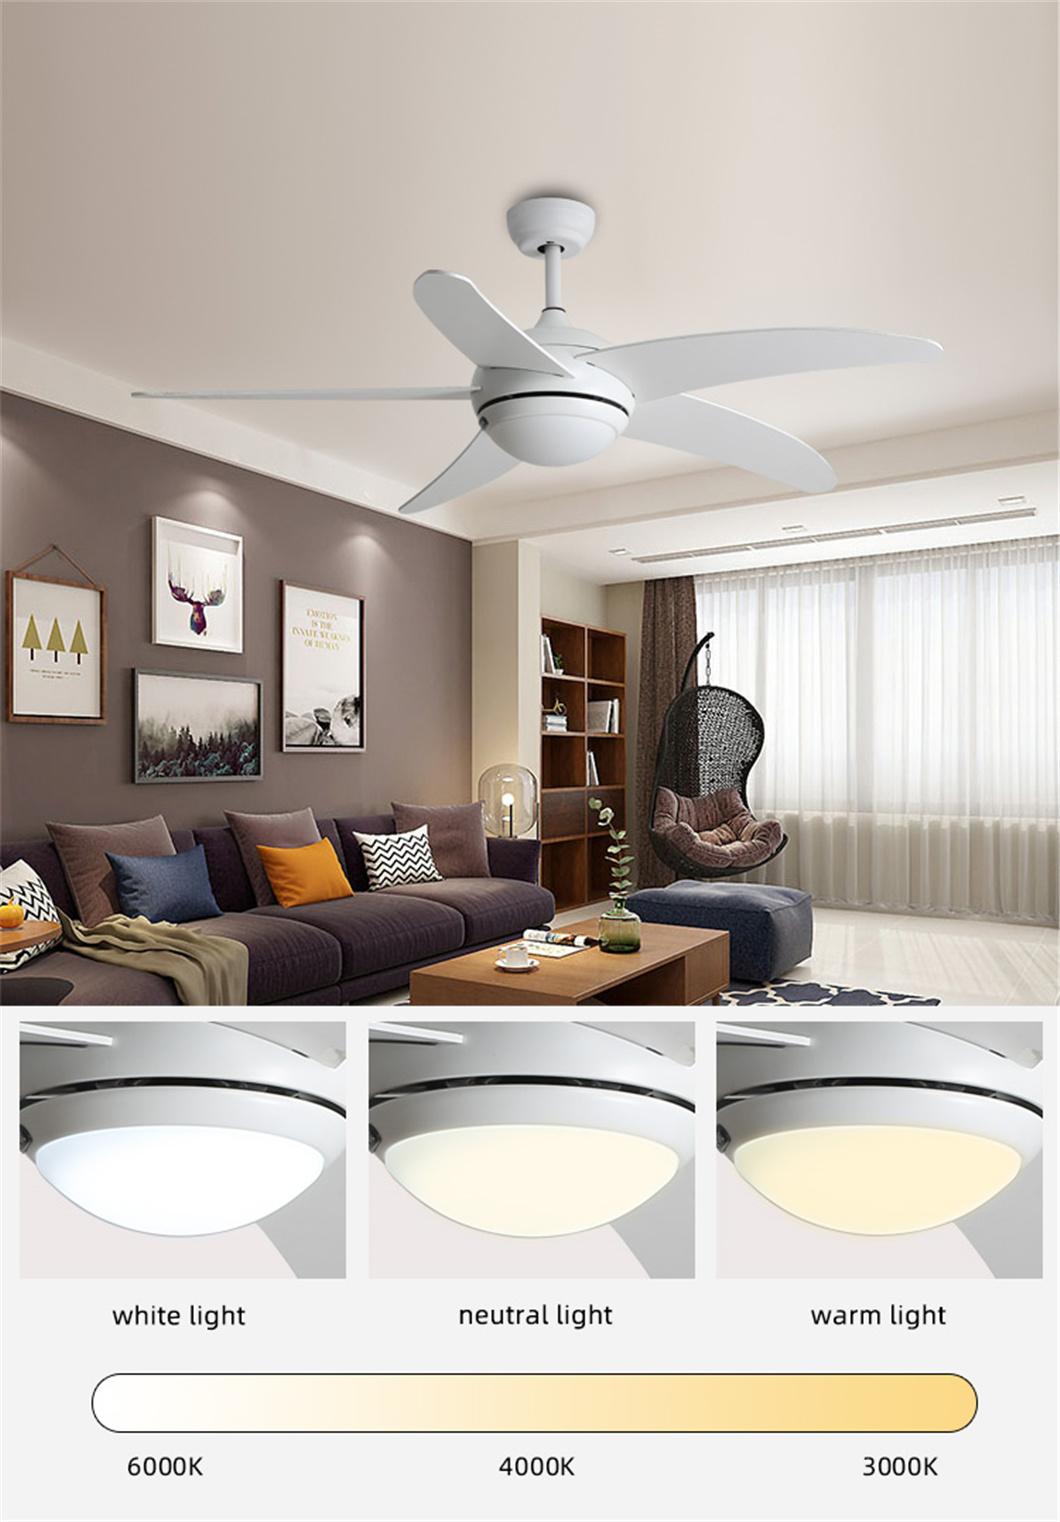 with AC Copper Motor Plywood Blades 3 Fan Speed Ceiling Fan Remote Control